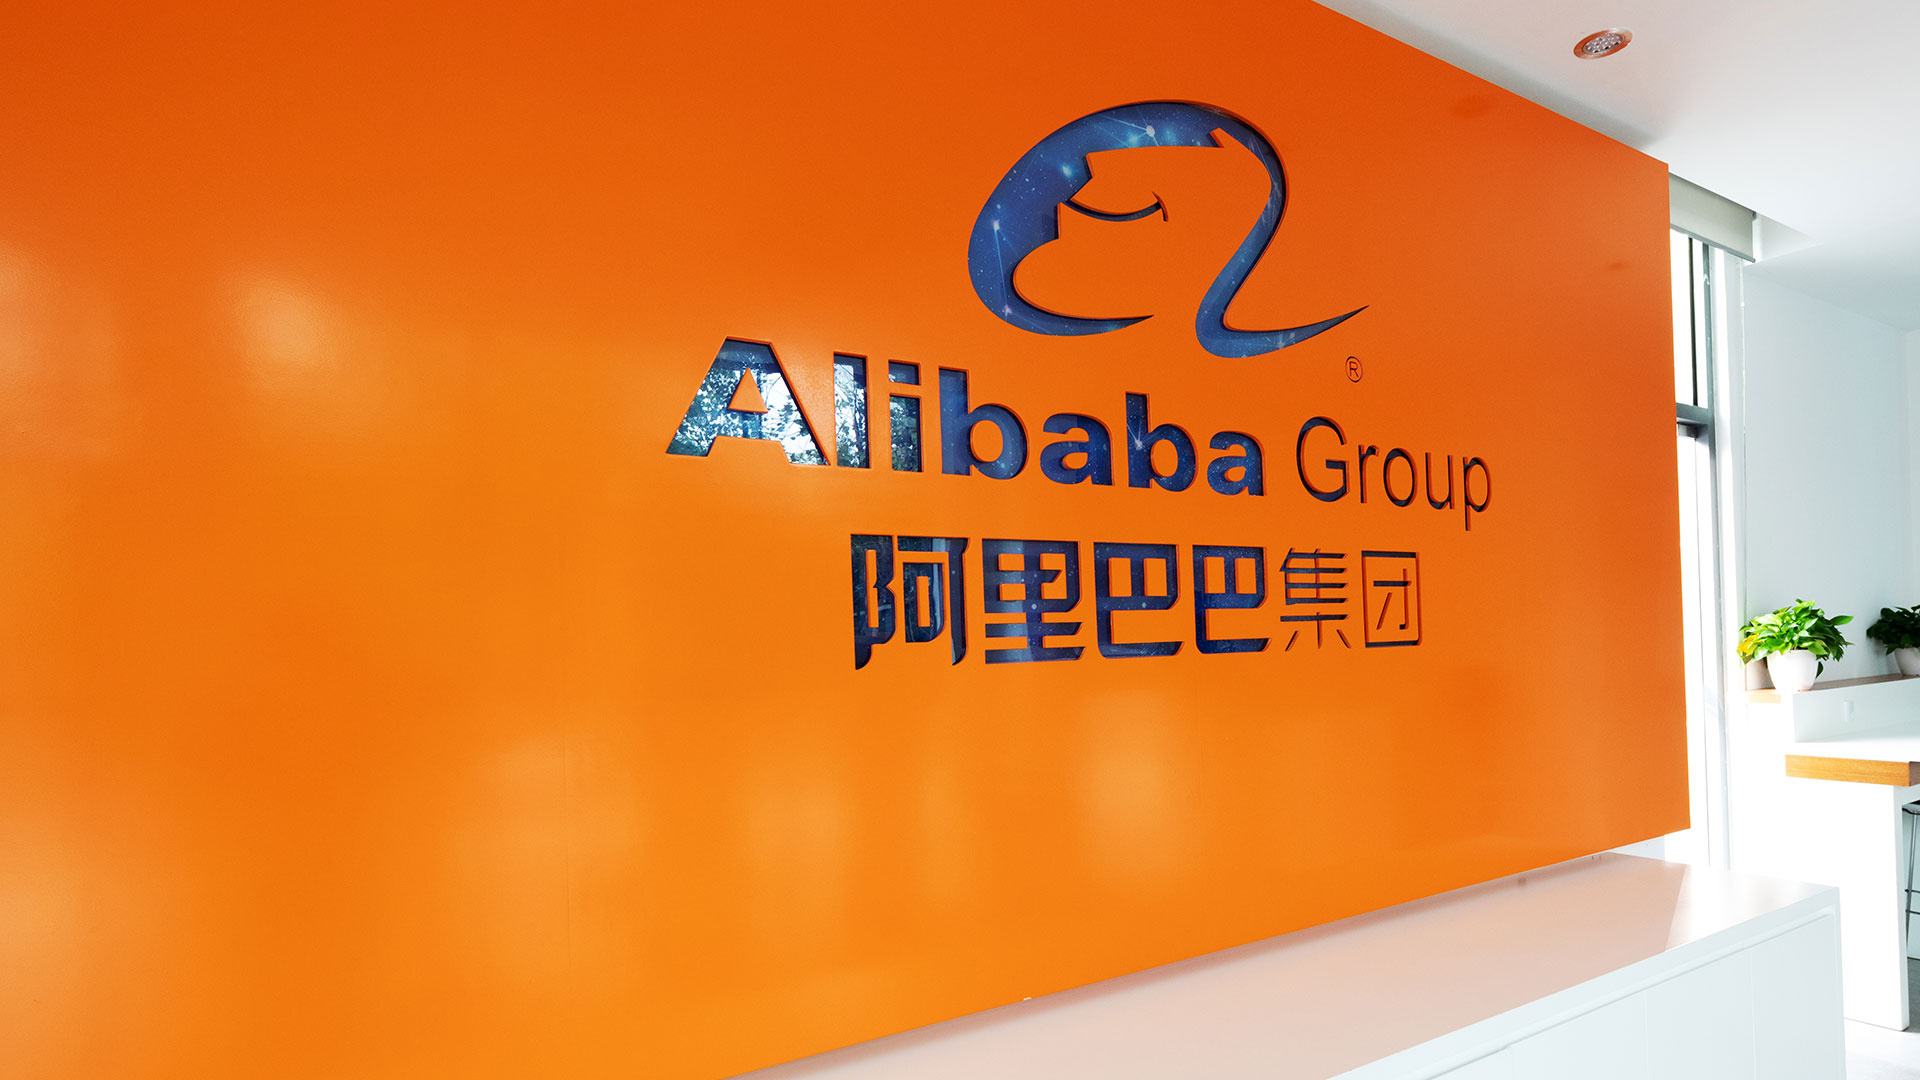 Alibaba Group: Bought a 50% stake of Guangzhou Evergrande F.C. from Evergrande Real Estate Group Ltd. On 5 June 2014. 1920x1080 Full HD Background.